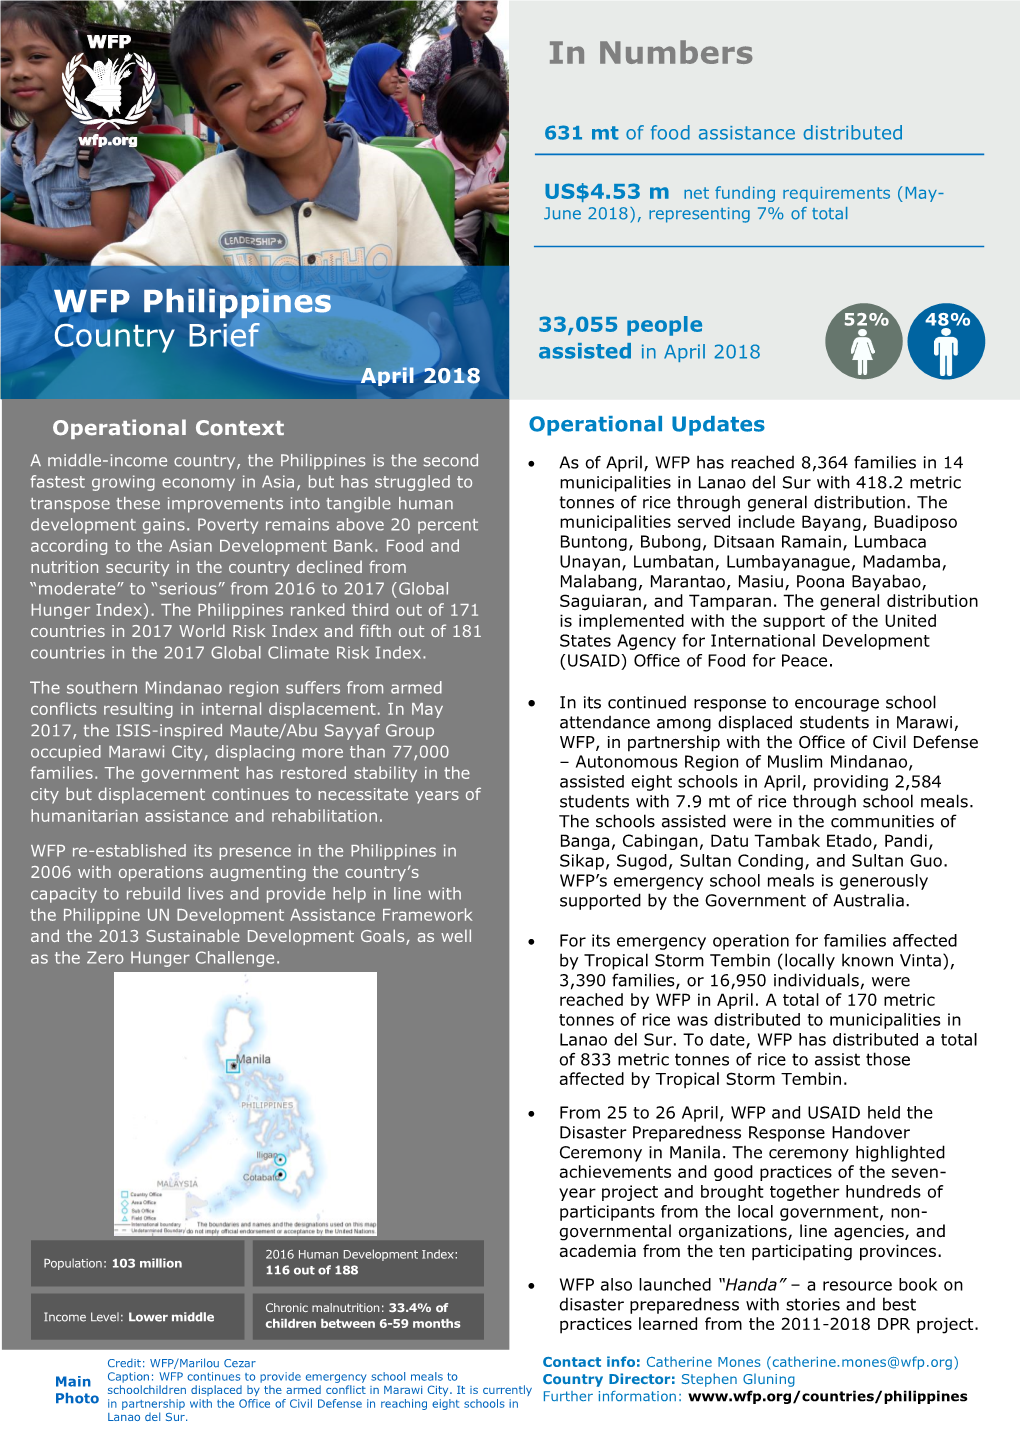 WFP Philippines Country Brief in Numbers